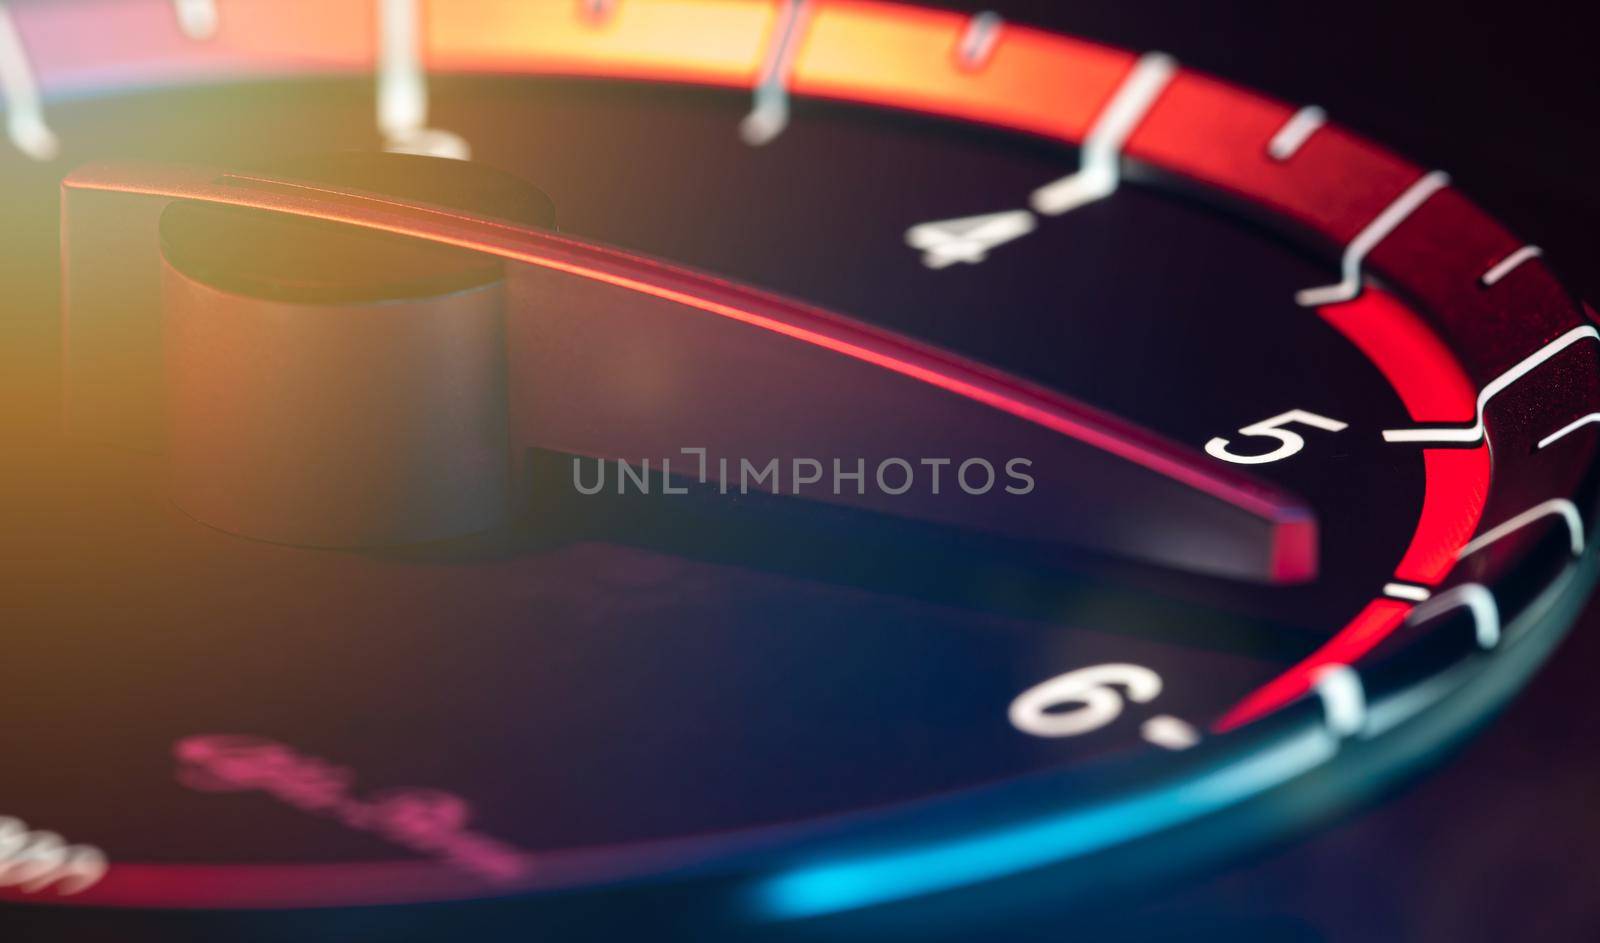 Rpm car odometer detail 2 by pippocarlot